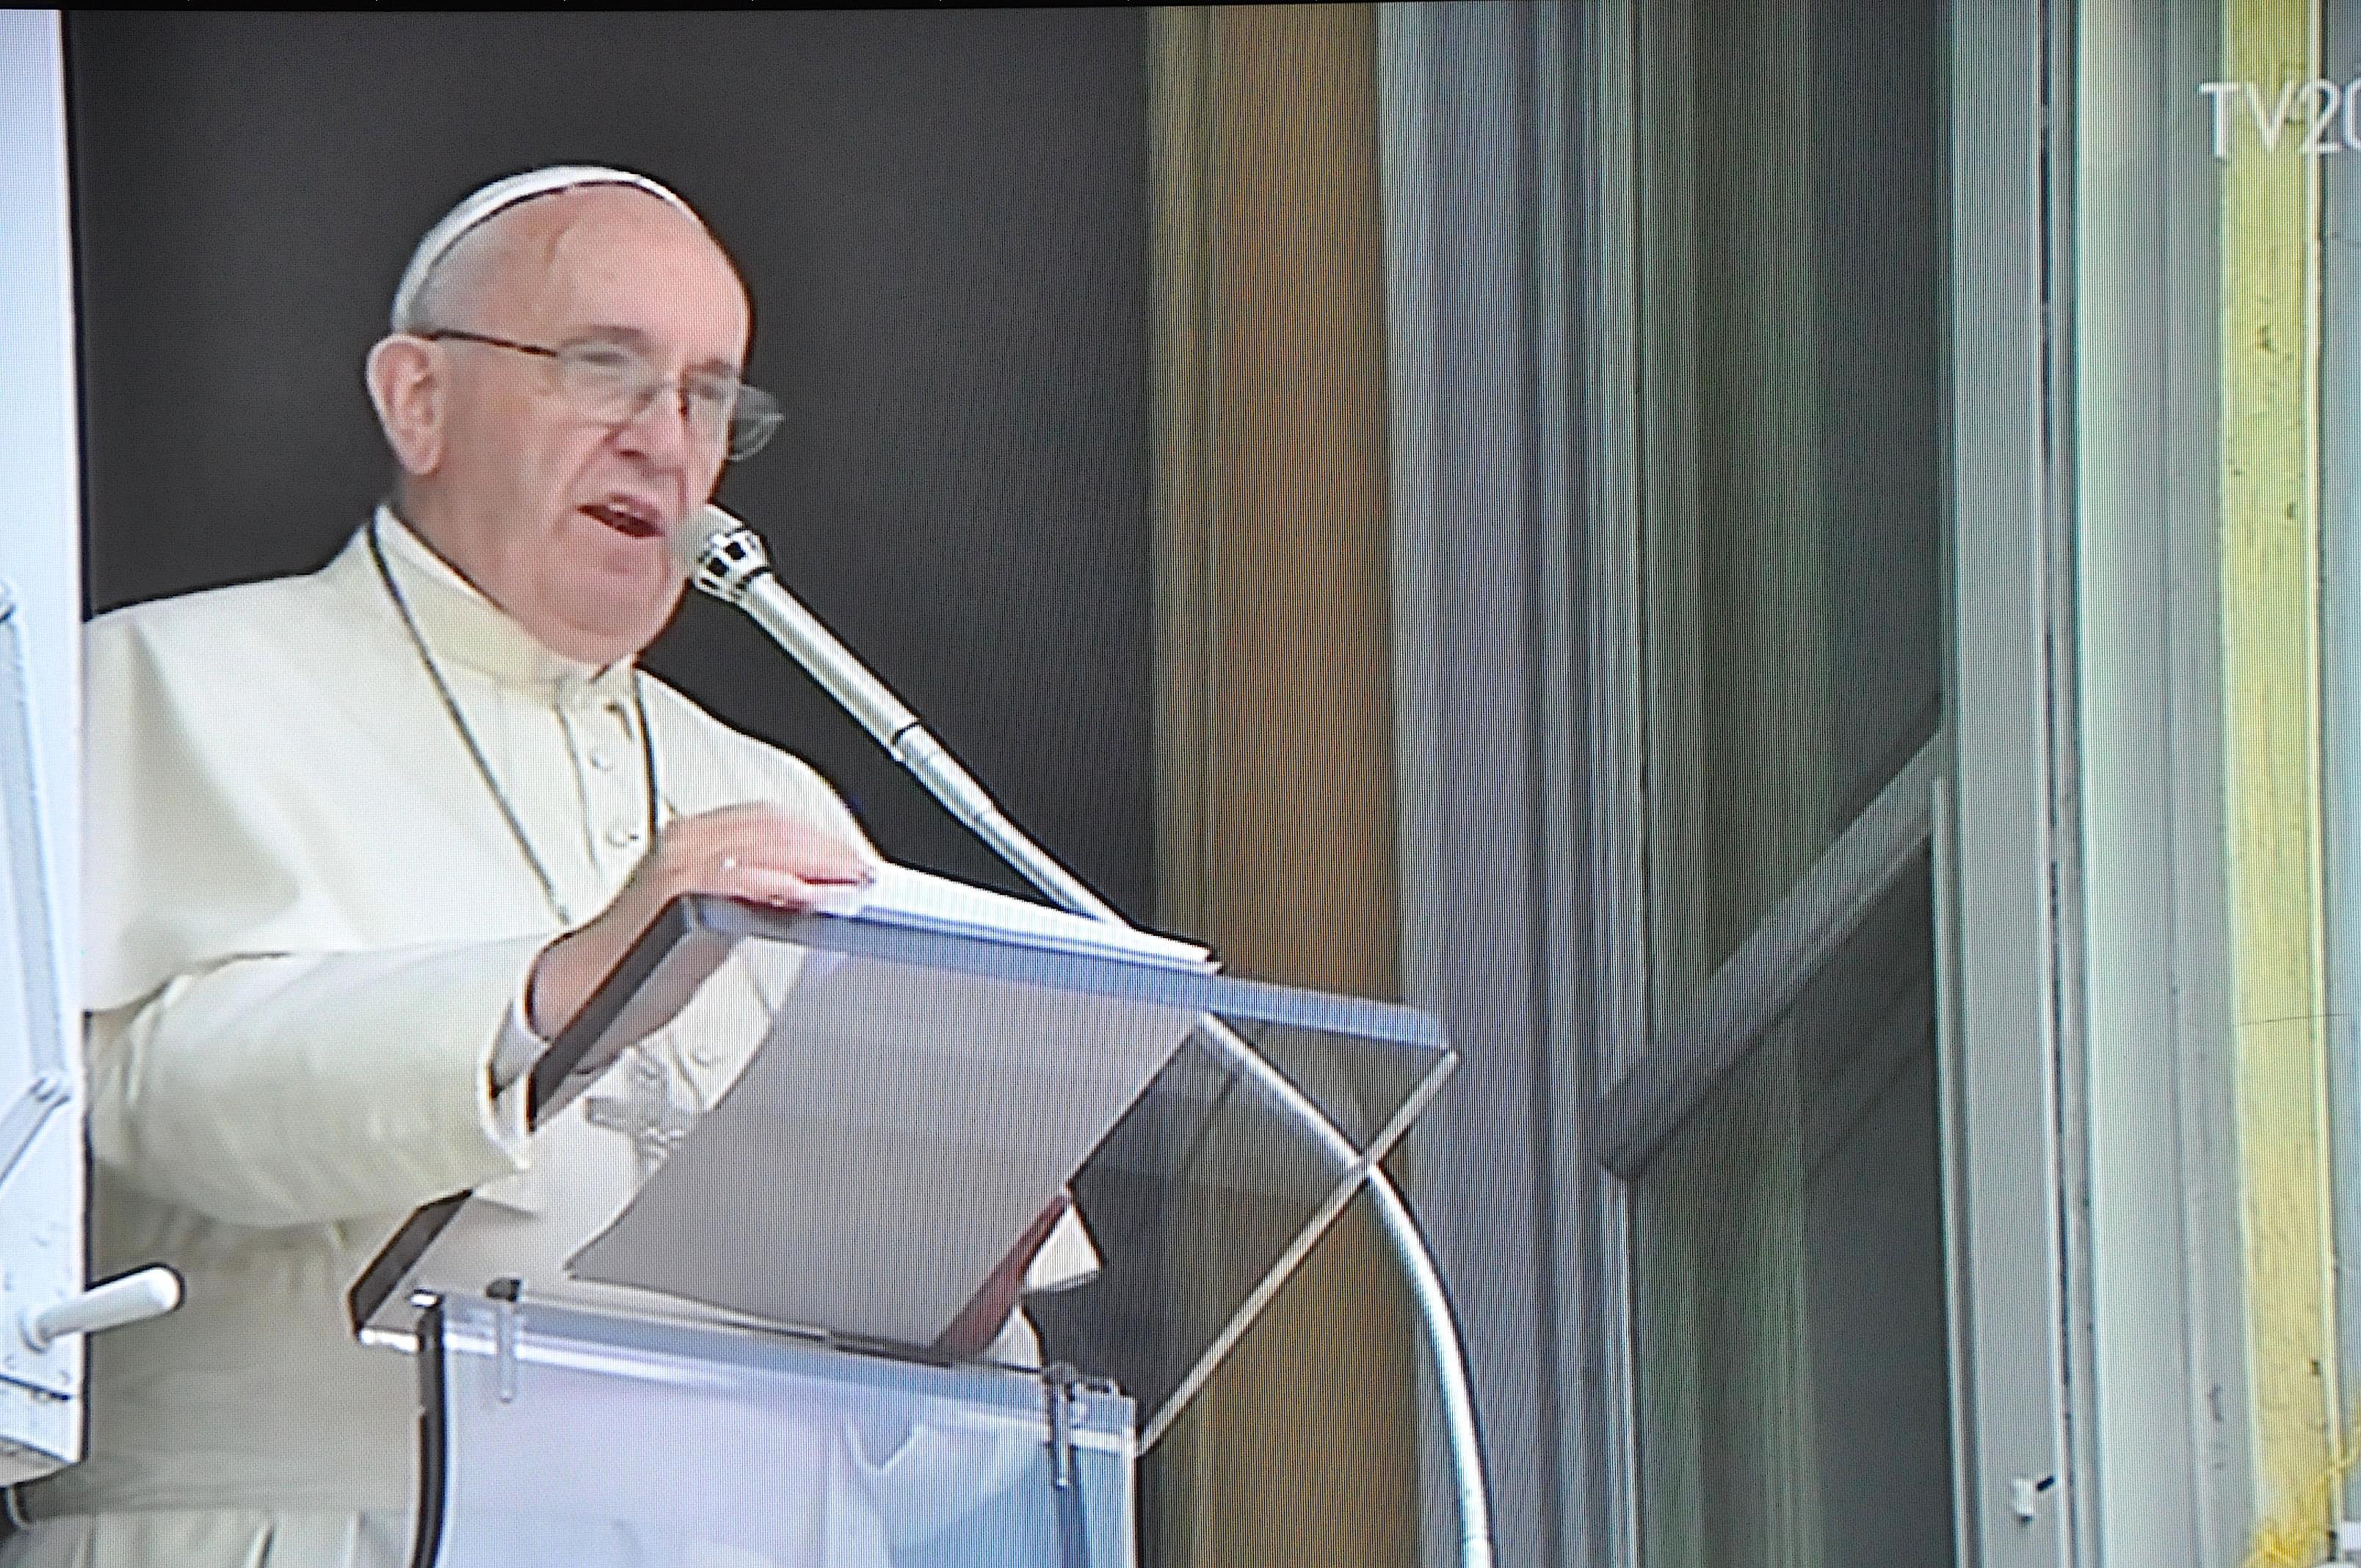 Presentation of papal message for the Journey of peace